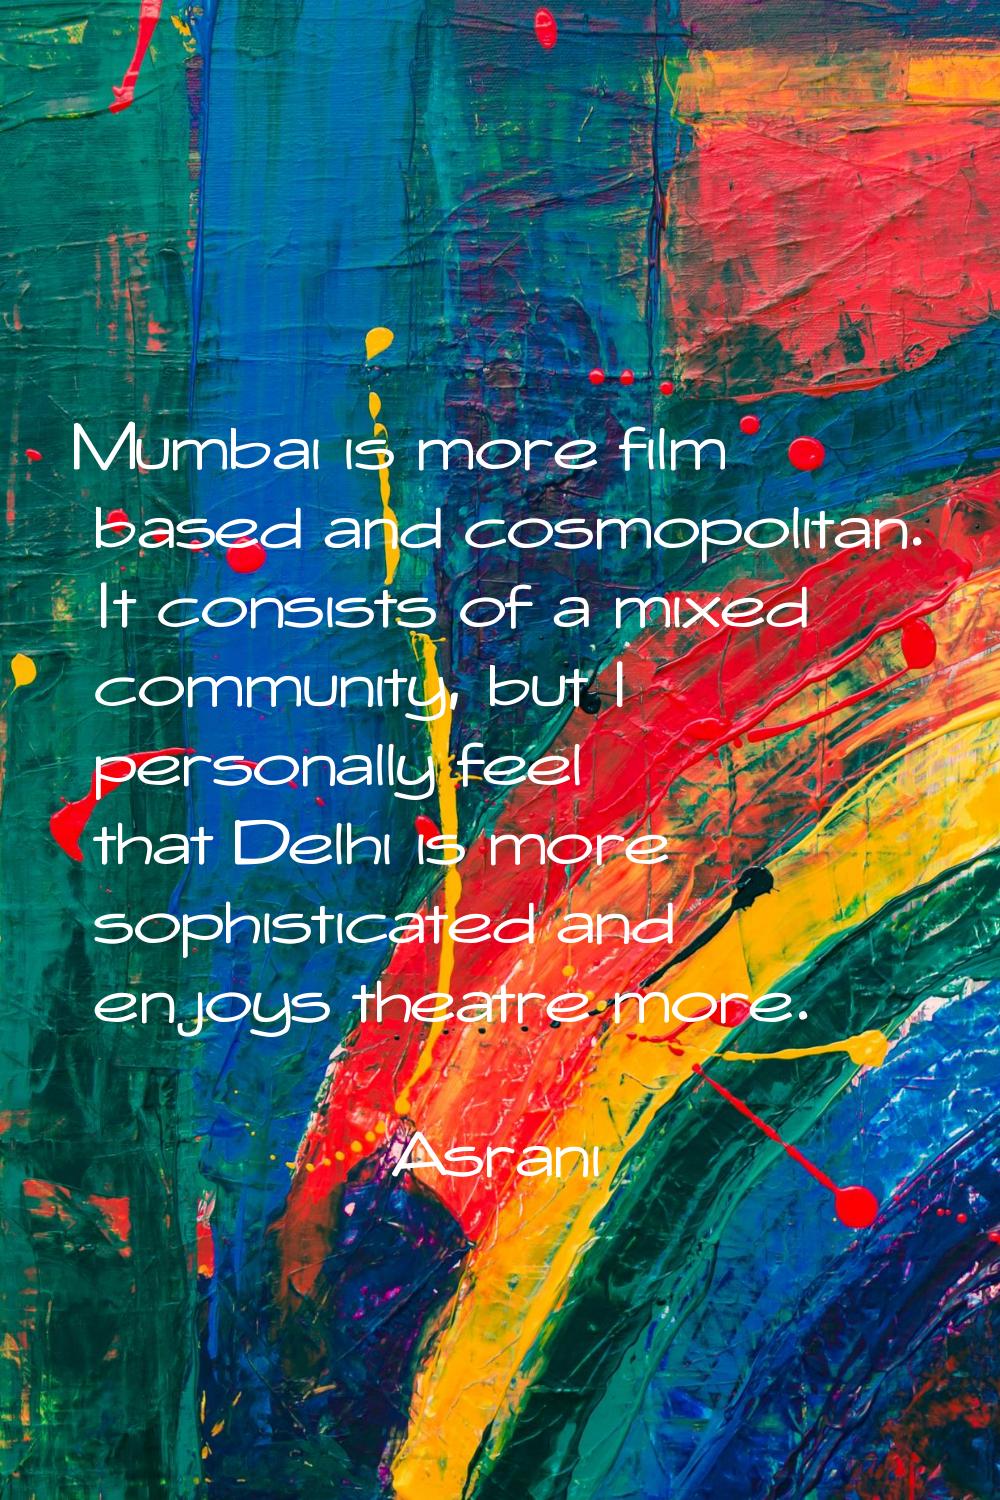 Mumbai is more film based and cosmopolitan. It consists of a mixed community, but I personally feel